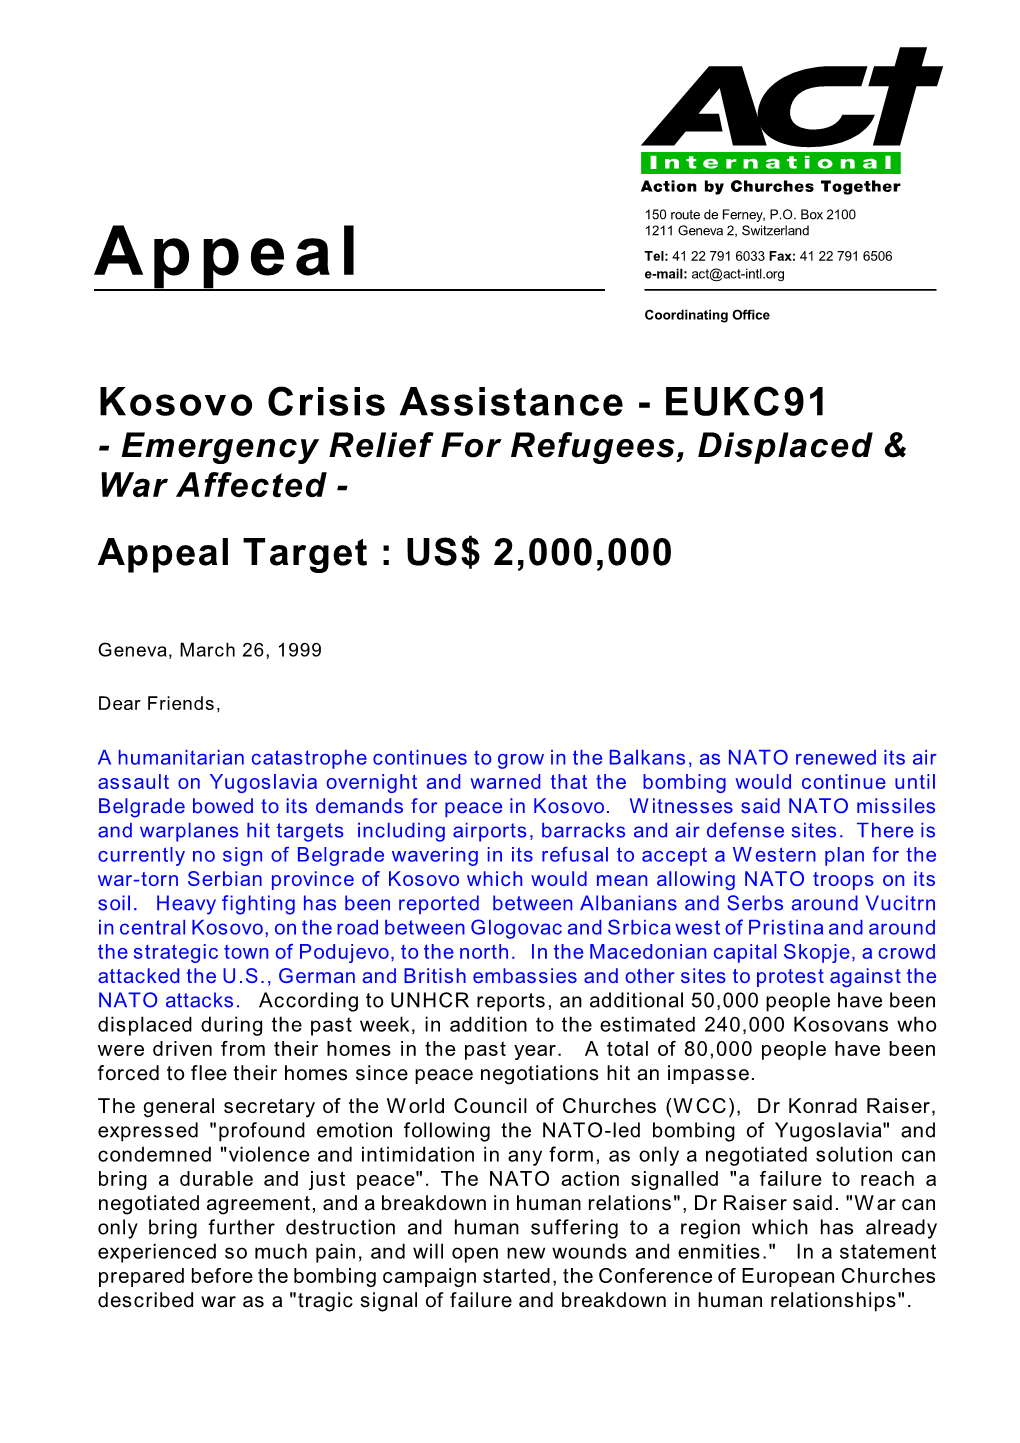 Kosovo Appeal